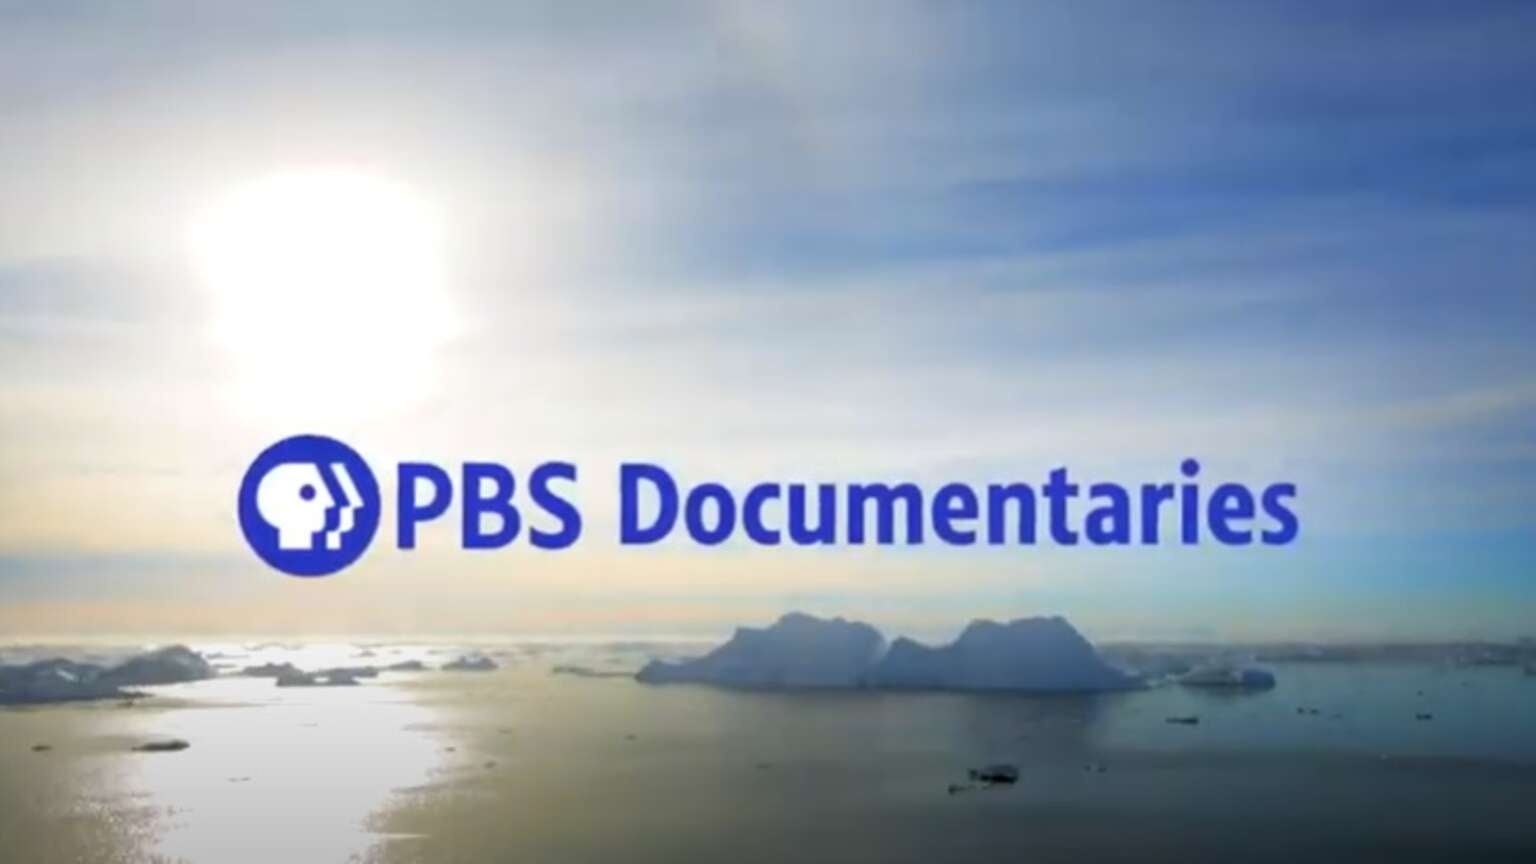 Amazon Prime Video Adds PBS Documentaries to Channel Lineup, Launches